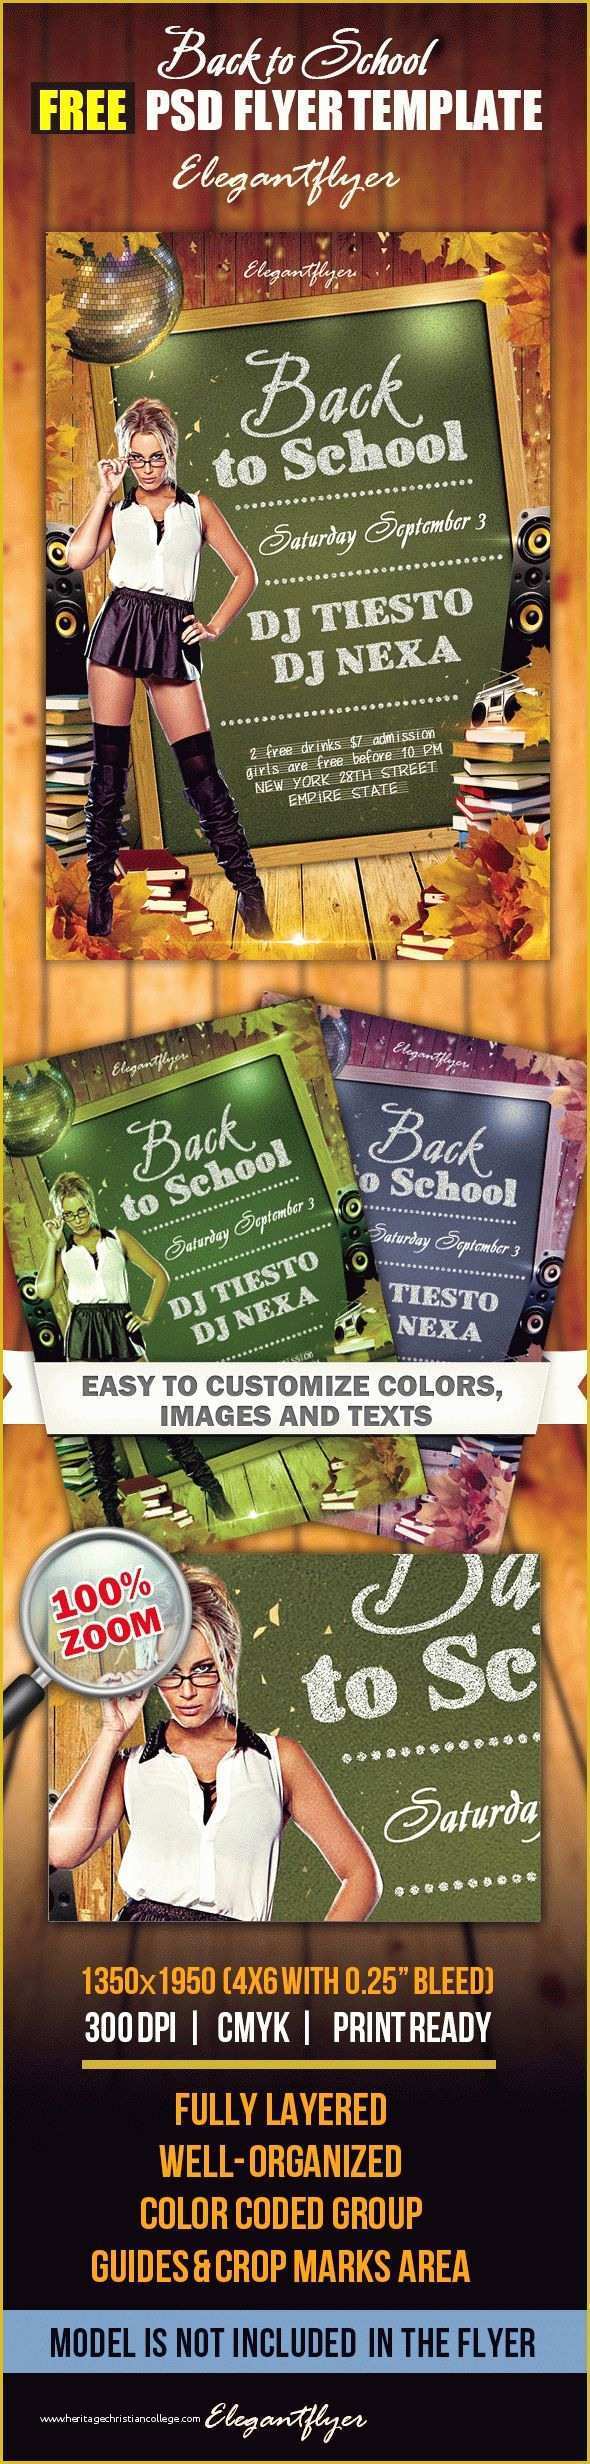 Free Back to School Flyer Template Of Back to School – Free Flyer Psd Template – by Elegantflyer